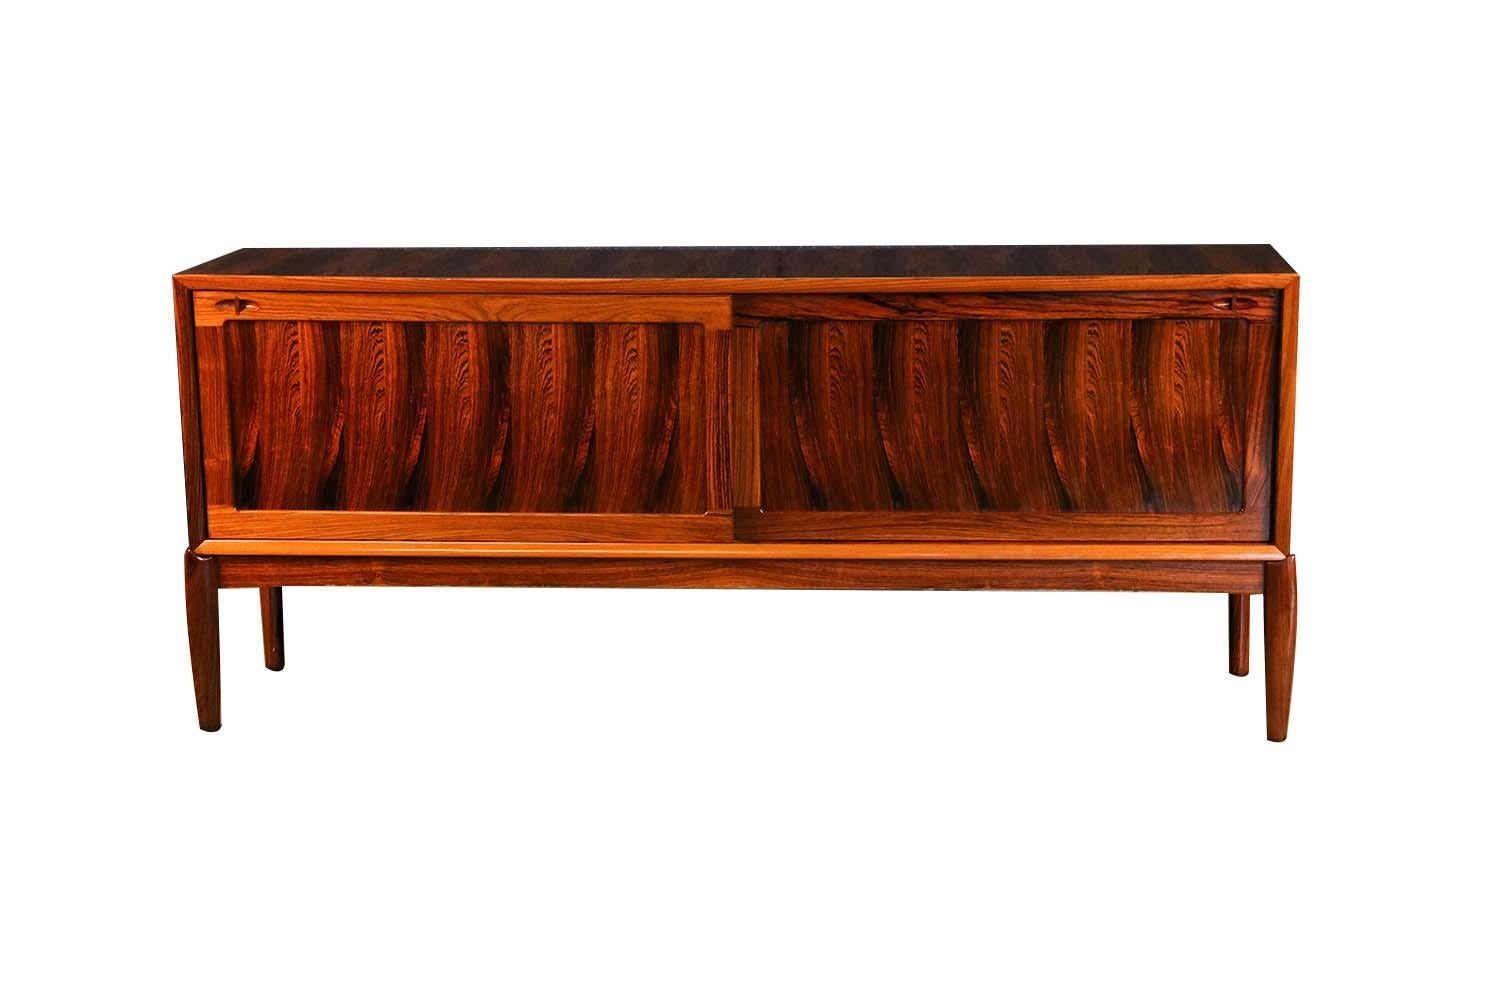 Vintage Danish designed Henry Walter Klein sideboard in Brazilian Rosewood for Bramin. A magnificent, rare, Danish designed sideboard by H.W. Klein featuring two large sliding doors that open to reveal two bays outfitted with a fitted rosewood